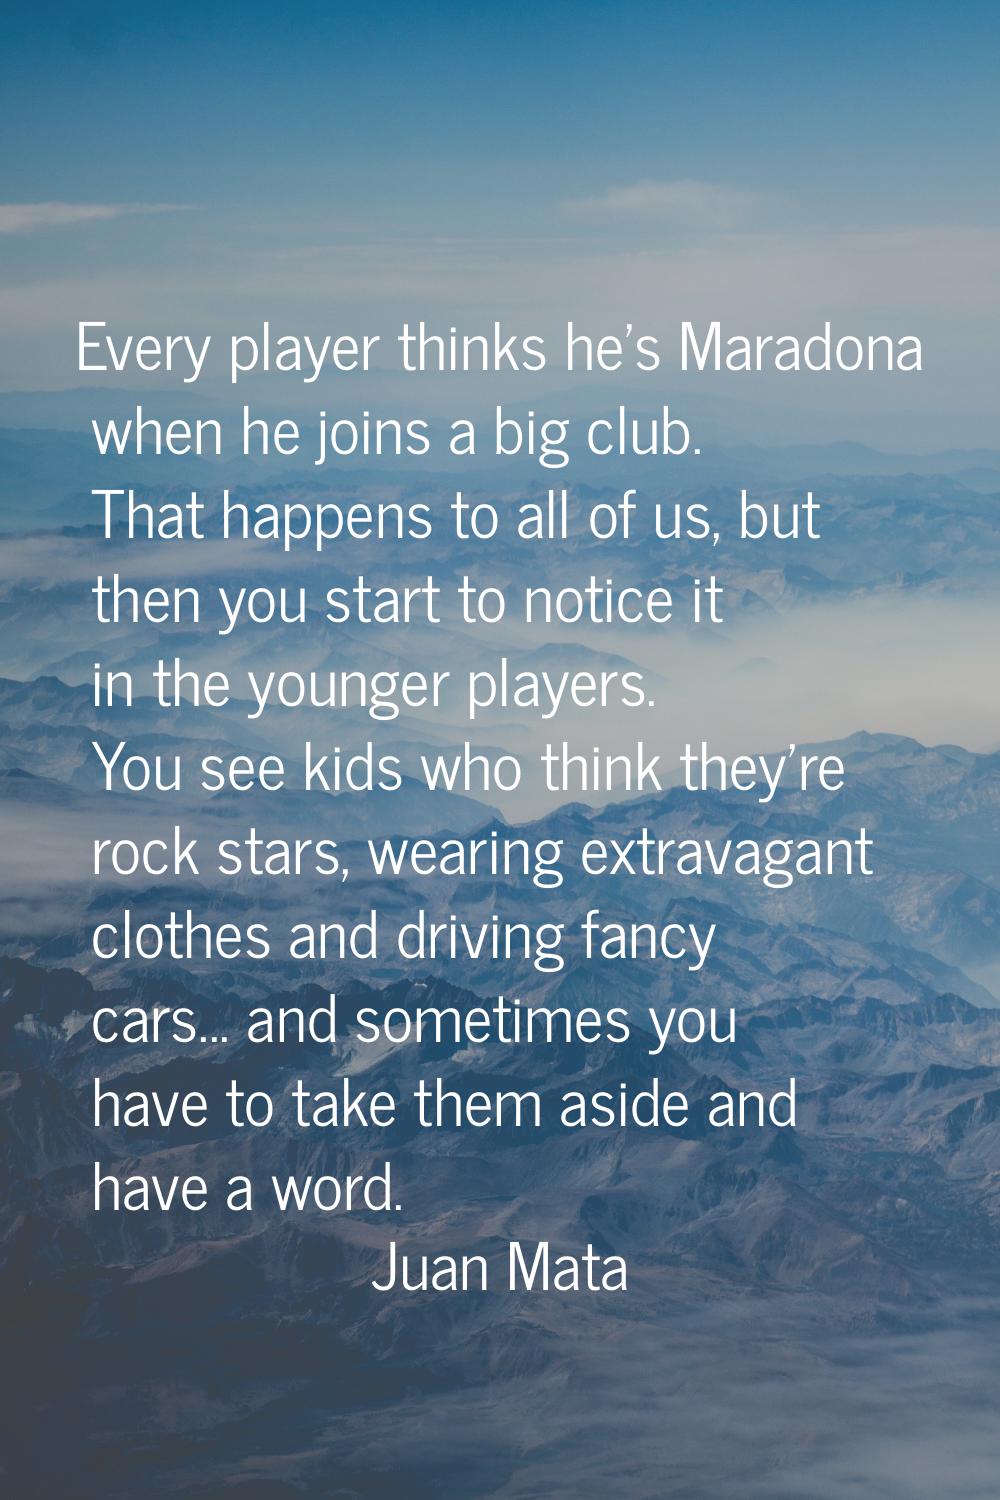 Every player thinks he's Maradona when he joins a big club. That happens to all of us, but then you